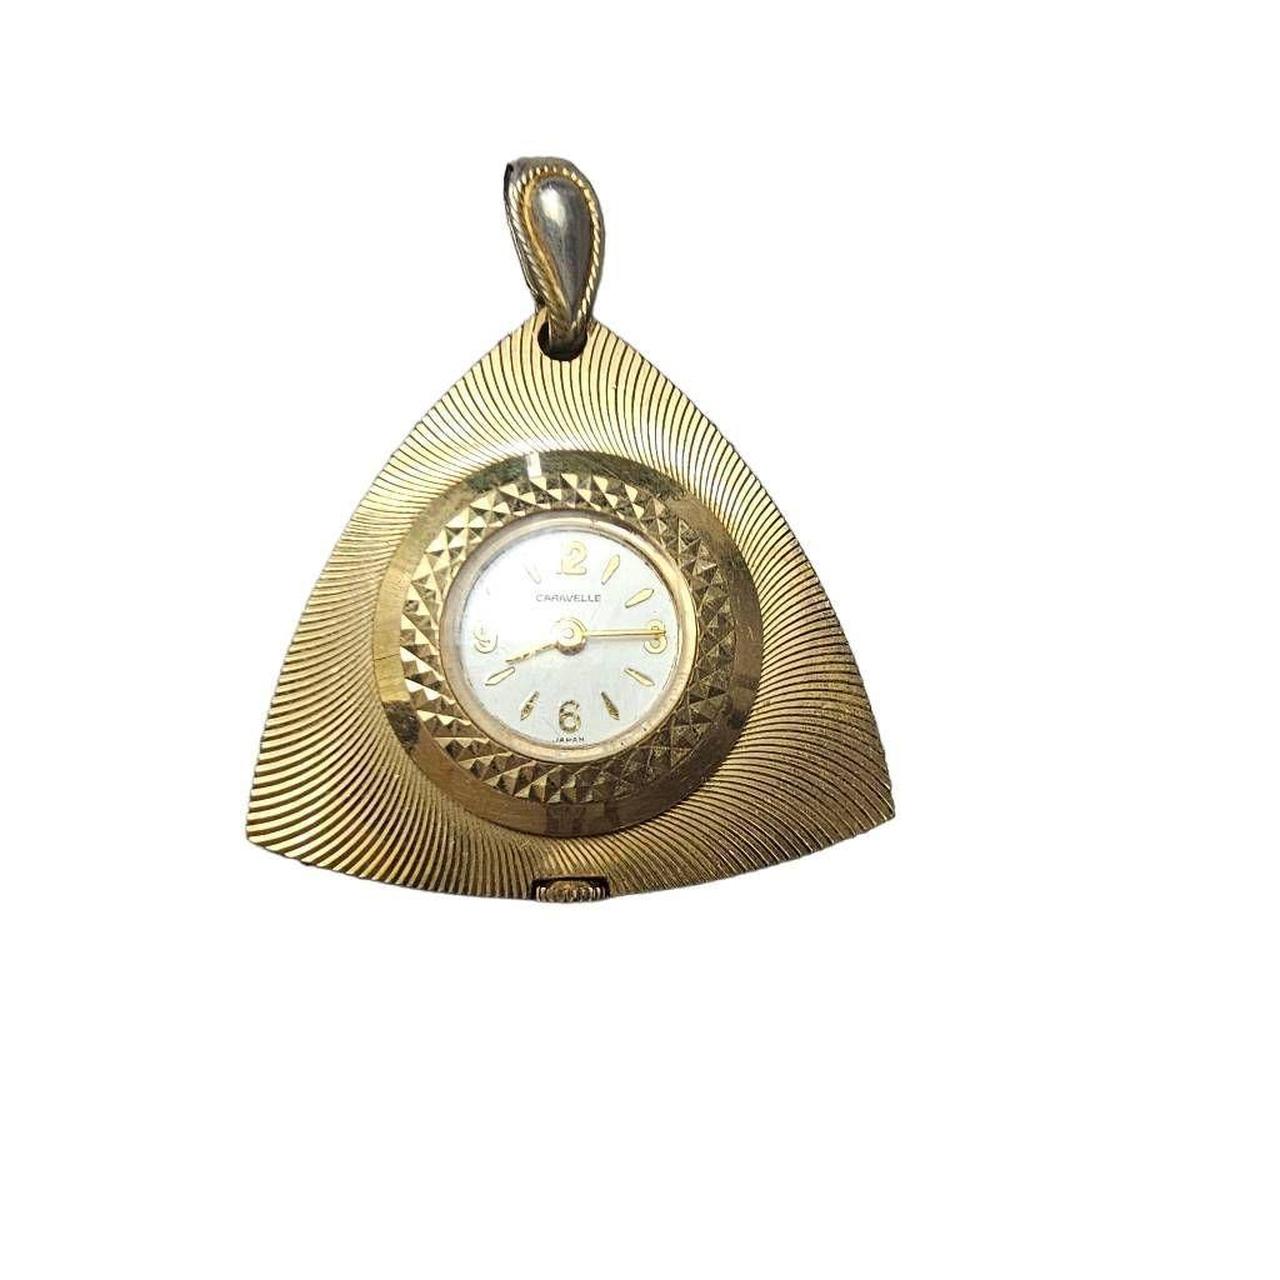 Vintage Caravelle Gold Plated Manual Wind Pendant Watch - Etsy